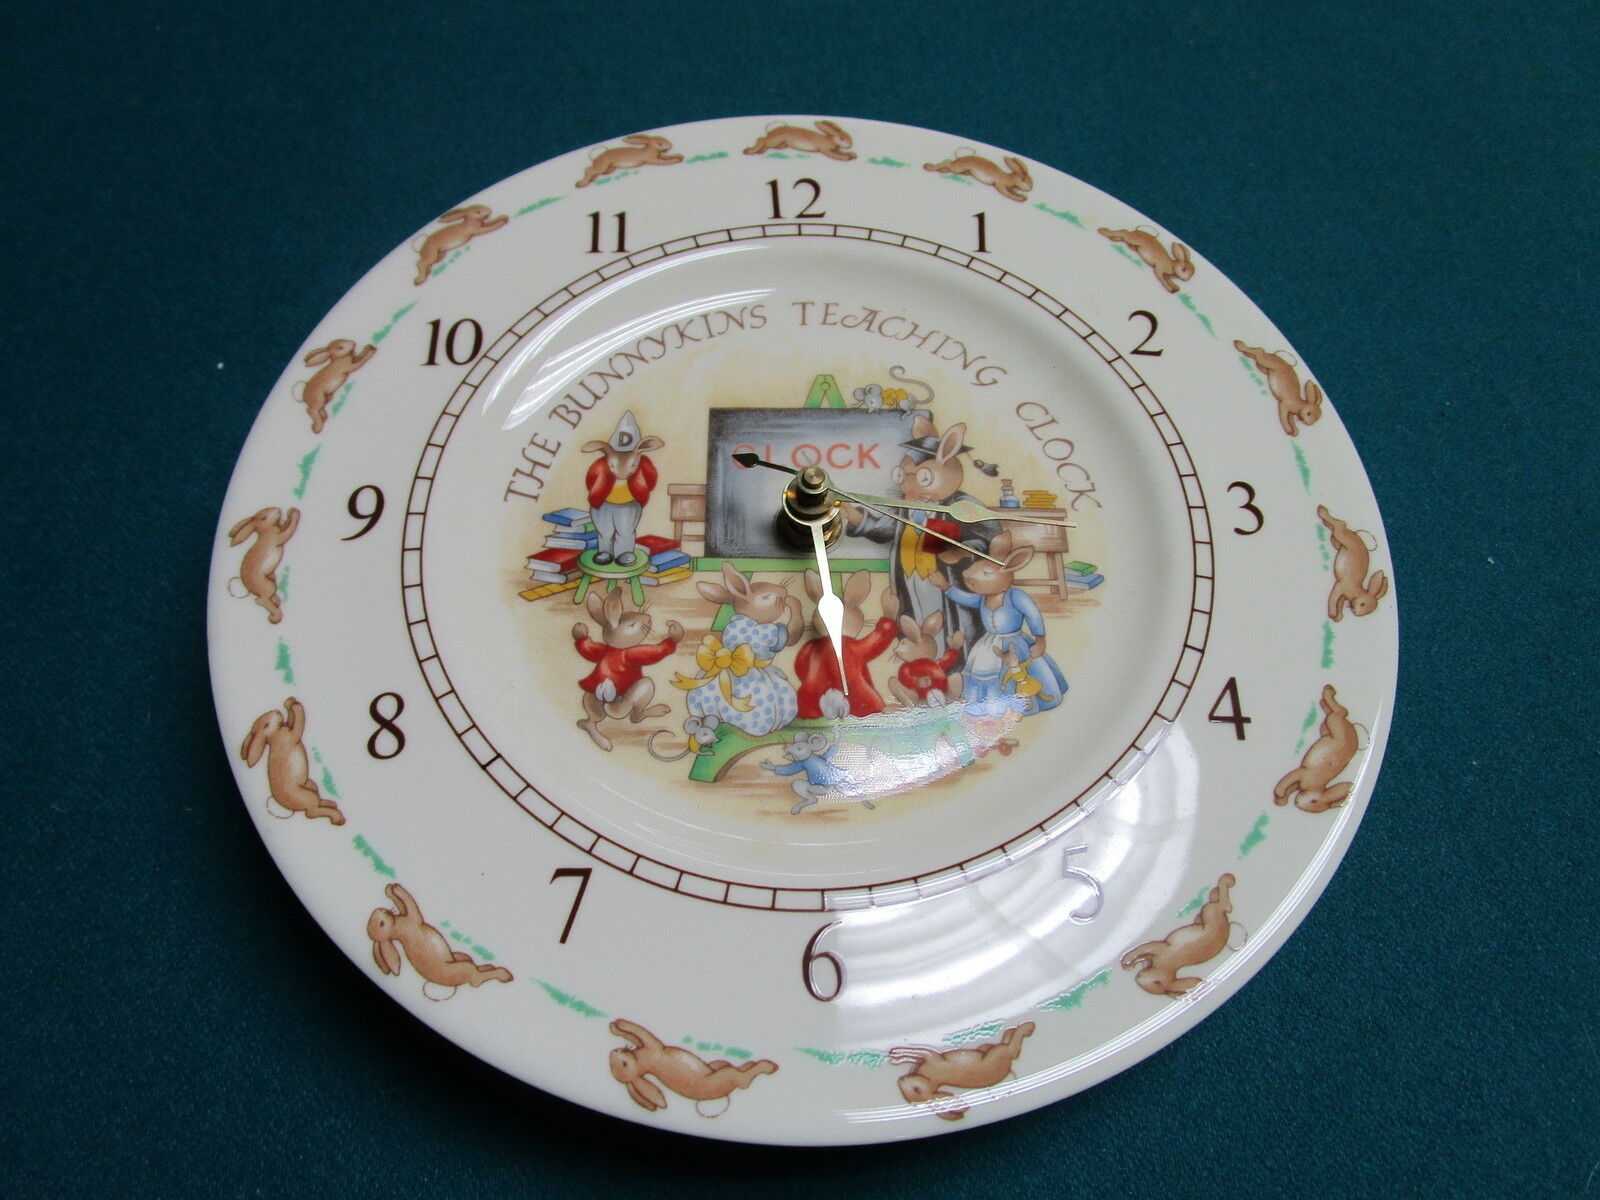 Teaching Clock Plate in Bunnykins (Albion Shape) by Royal Doulton England [80L] - $74.25